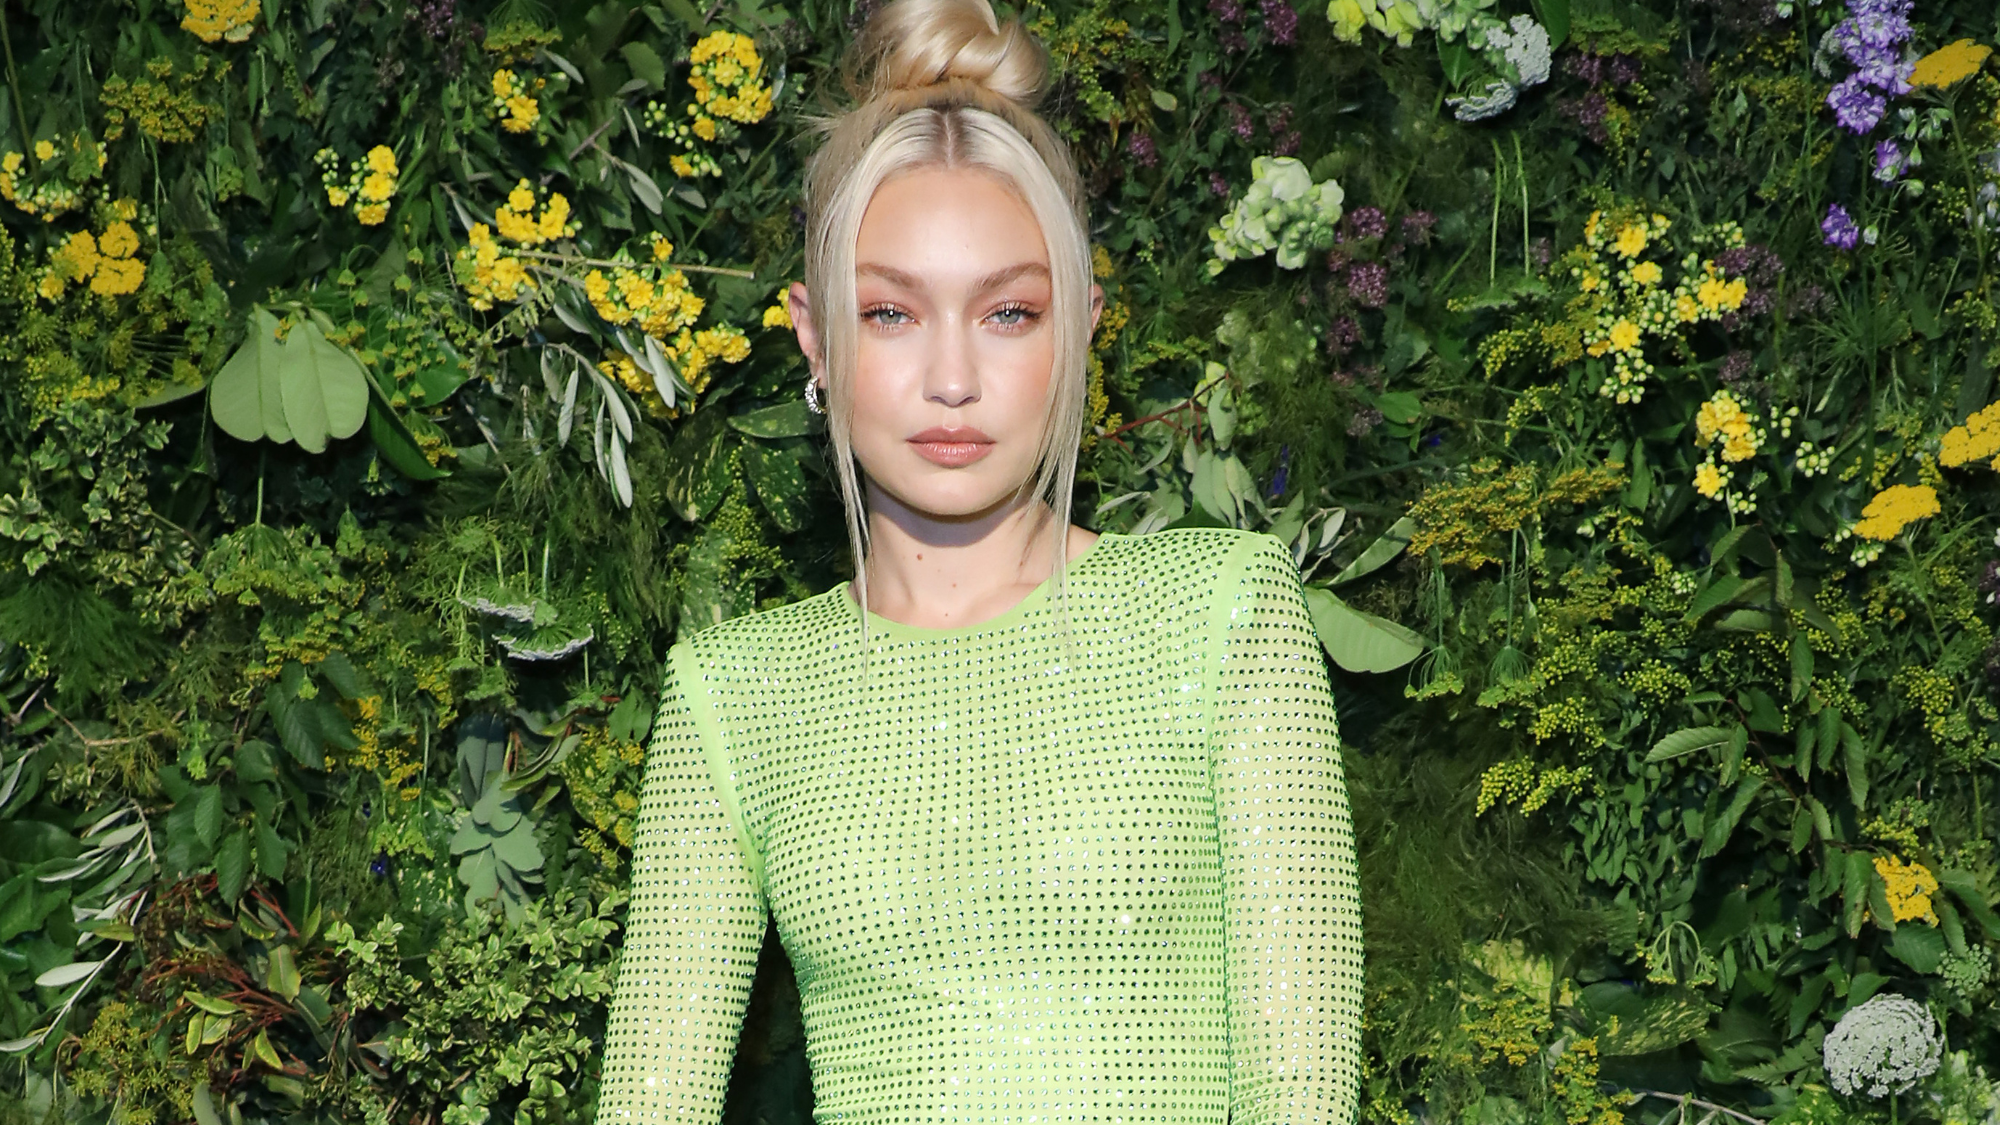 Gigi Hadid Celebrates the Launch of Her Brand, Guest in Residence